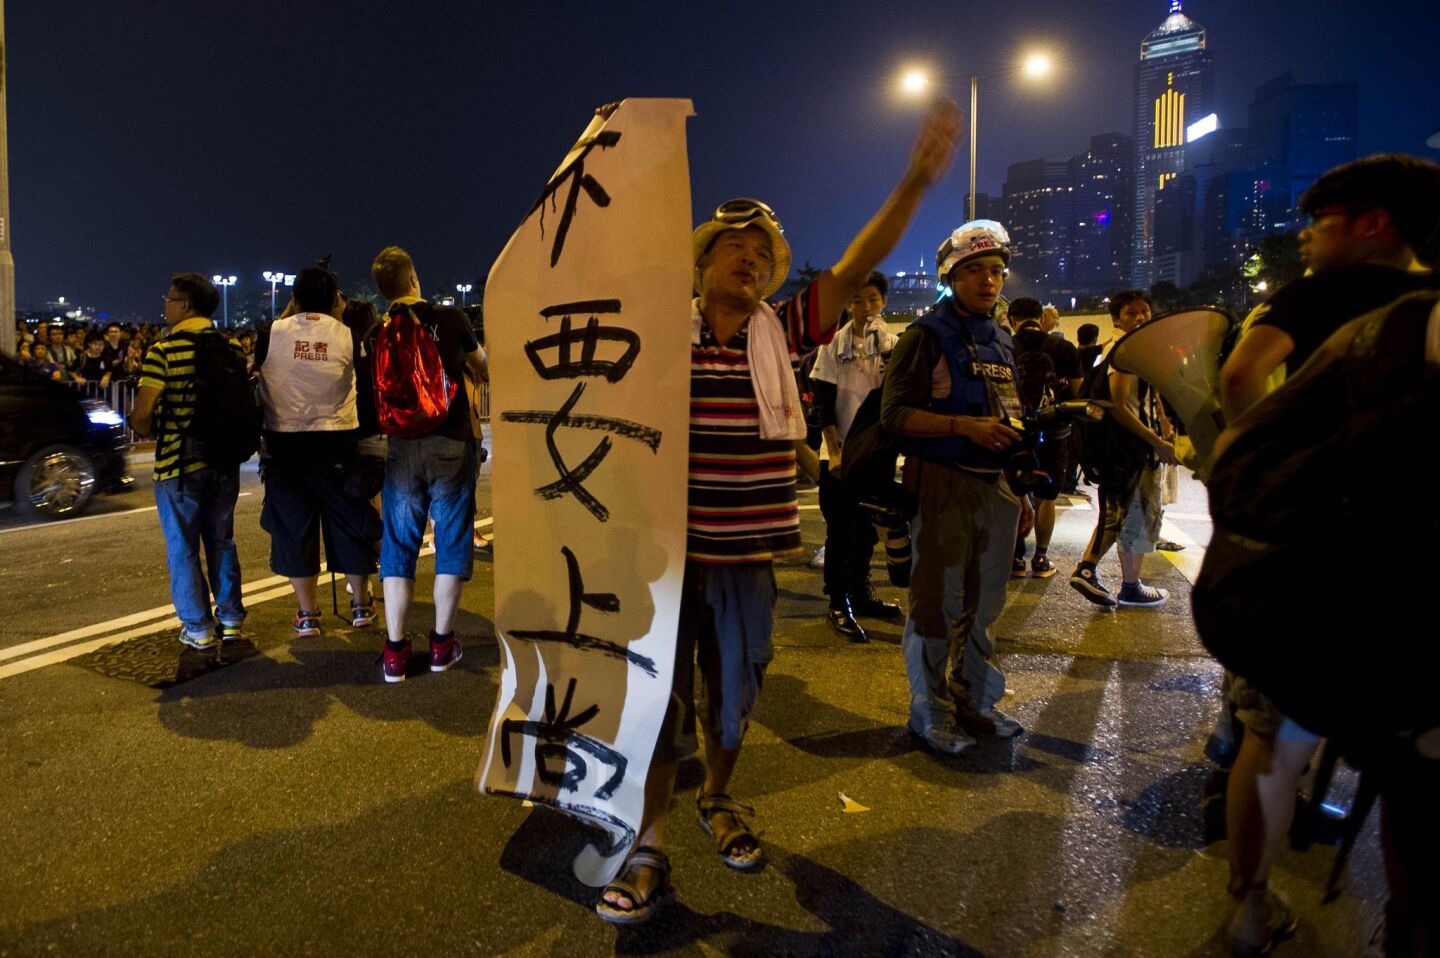 A man holds a sign that reads "Don't go to school" as a pro-democracy rally continues in Hong Kong.